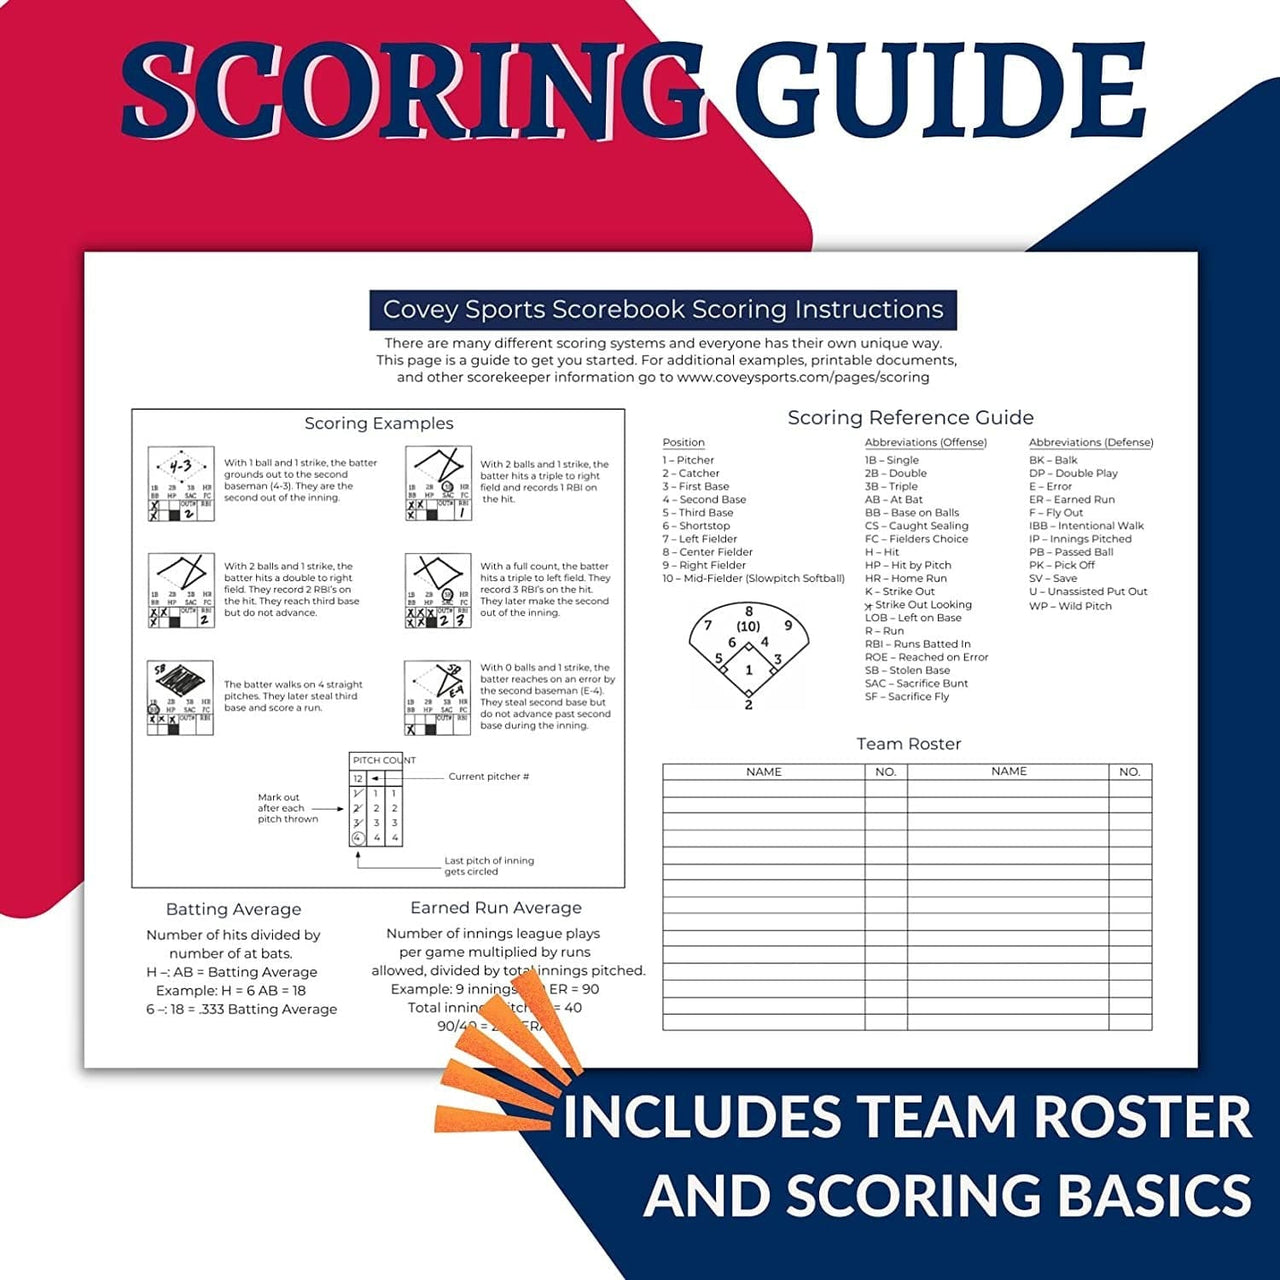 Covey Sports Sporting Goods Covey Sports Baseball & Softball Scorebook Side by Side Format (50 Games)